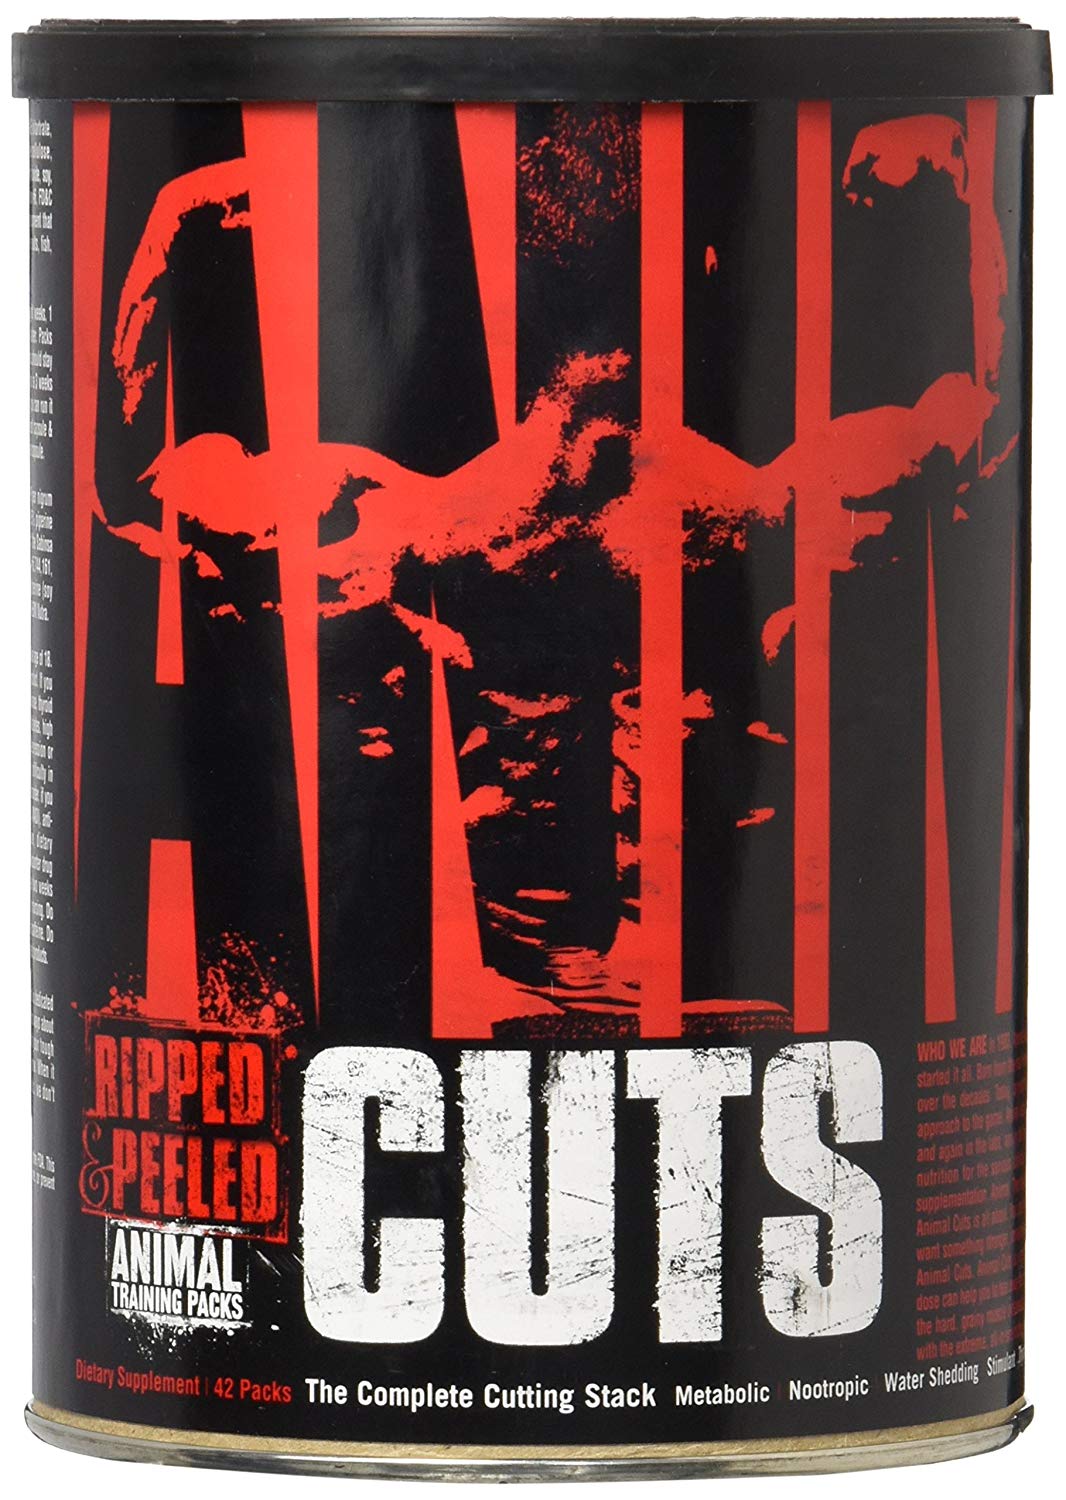 Animal Cuts: A Must-Have for any Fat Loss Regimen